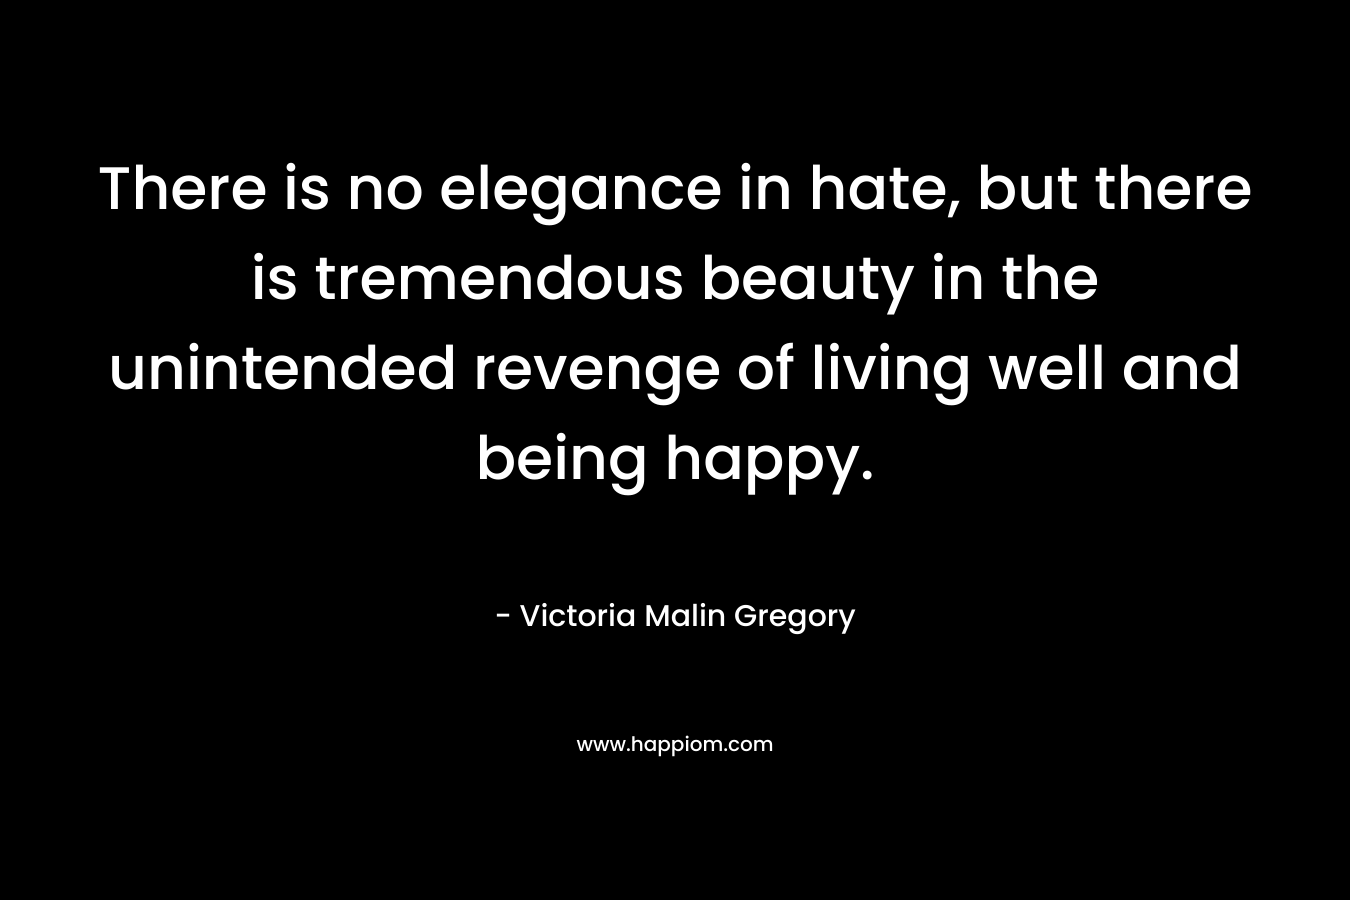 There is no elegance in hate, but there is tremendous beauty in the unintended revenge of living well and being happy. – Victoria Malin Gregory